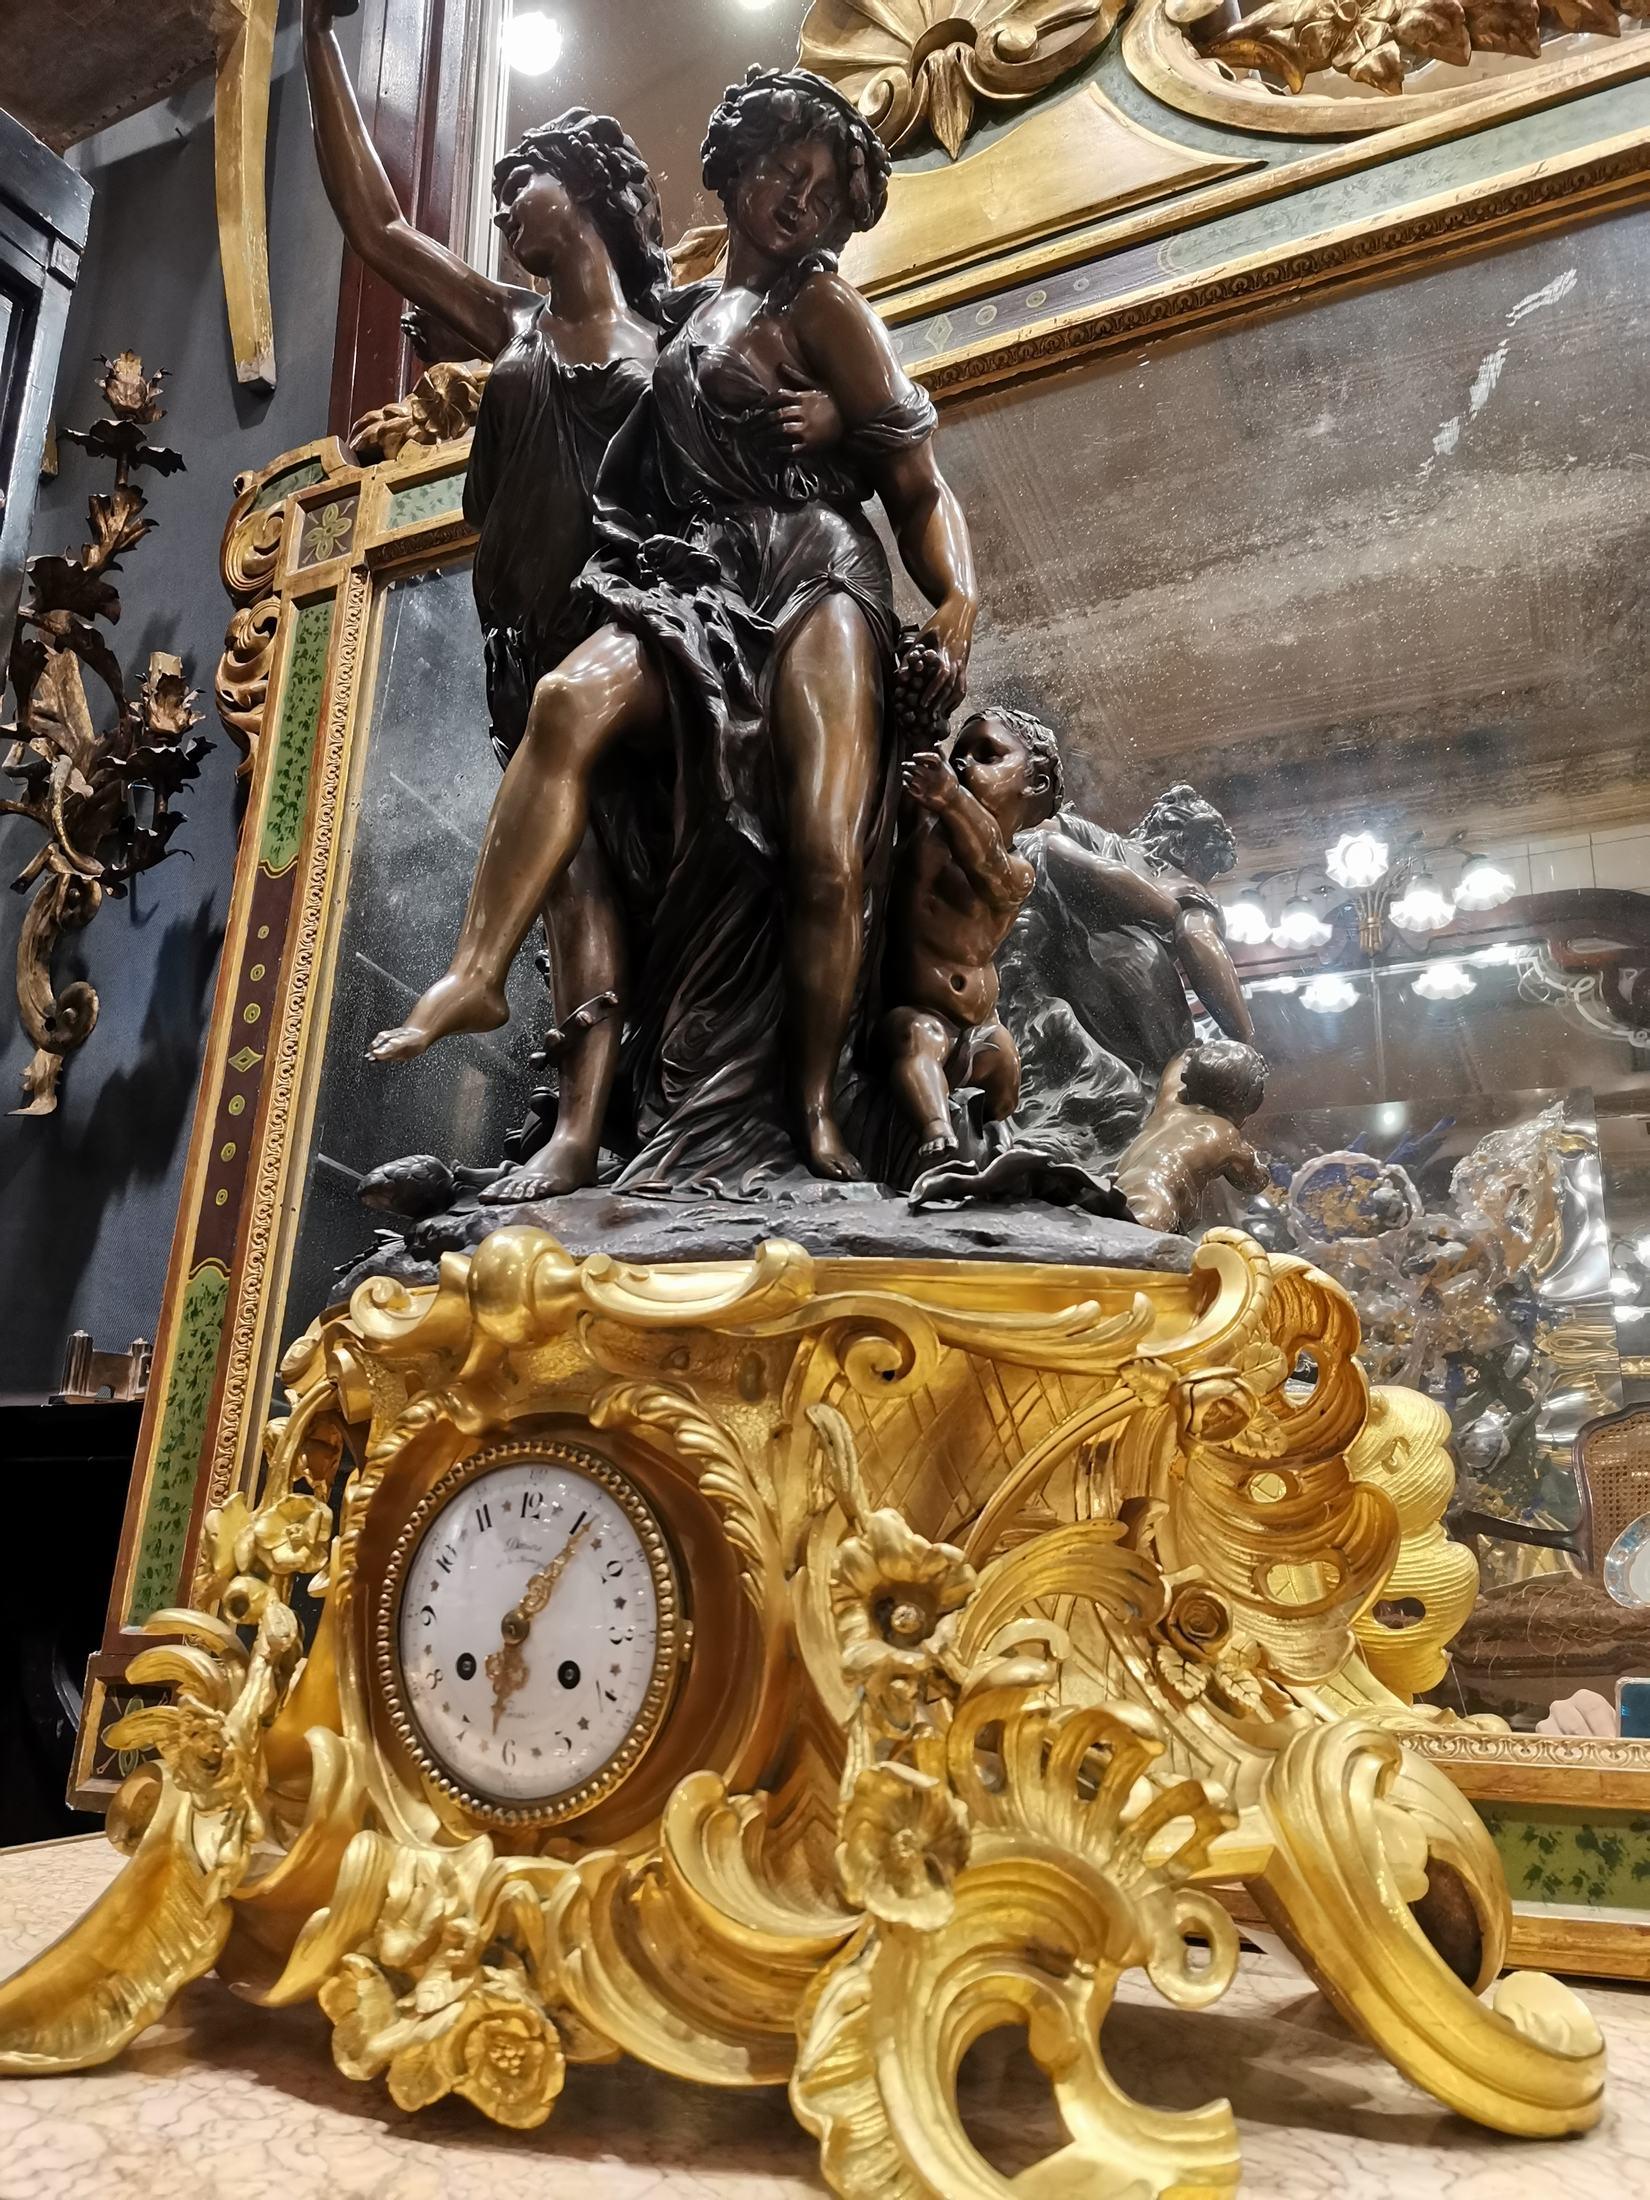 Very large and heavy bronze clock,the bronze is gilded and patinated.
The work of the bronze i very fine quality.
Signed:CLODION.
90 cm high and 50 kg aprox
19th century
very good condition.